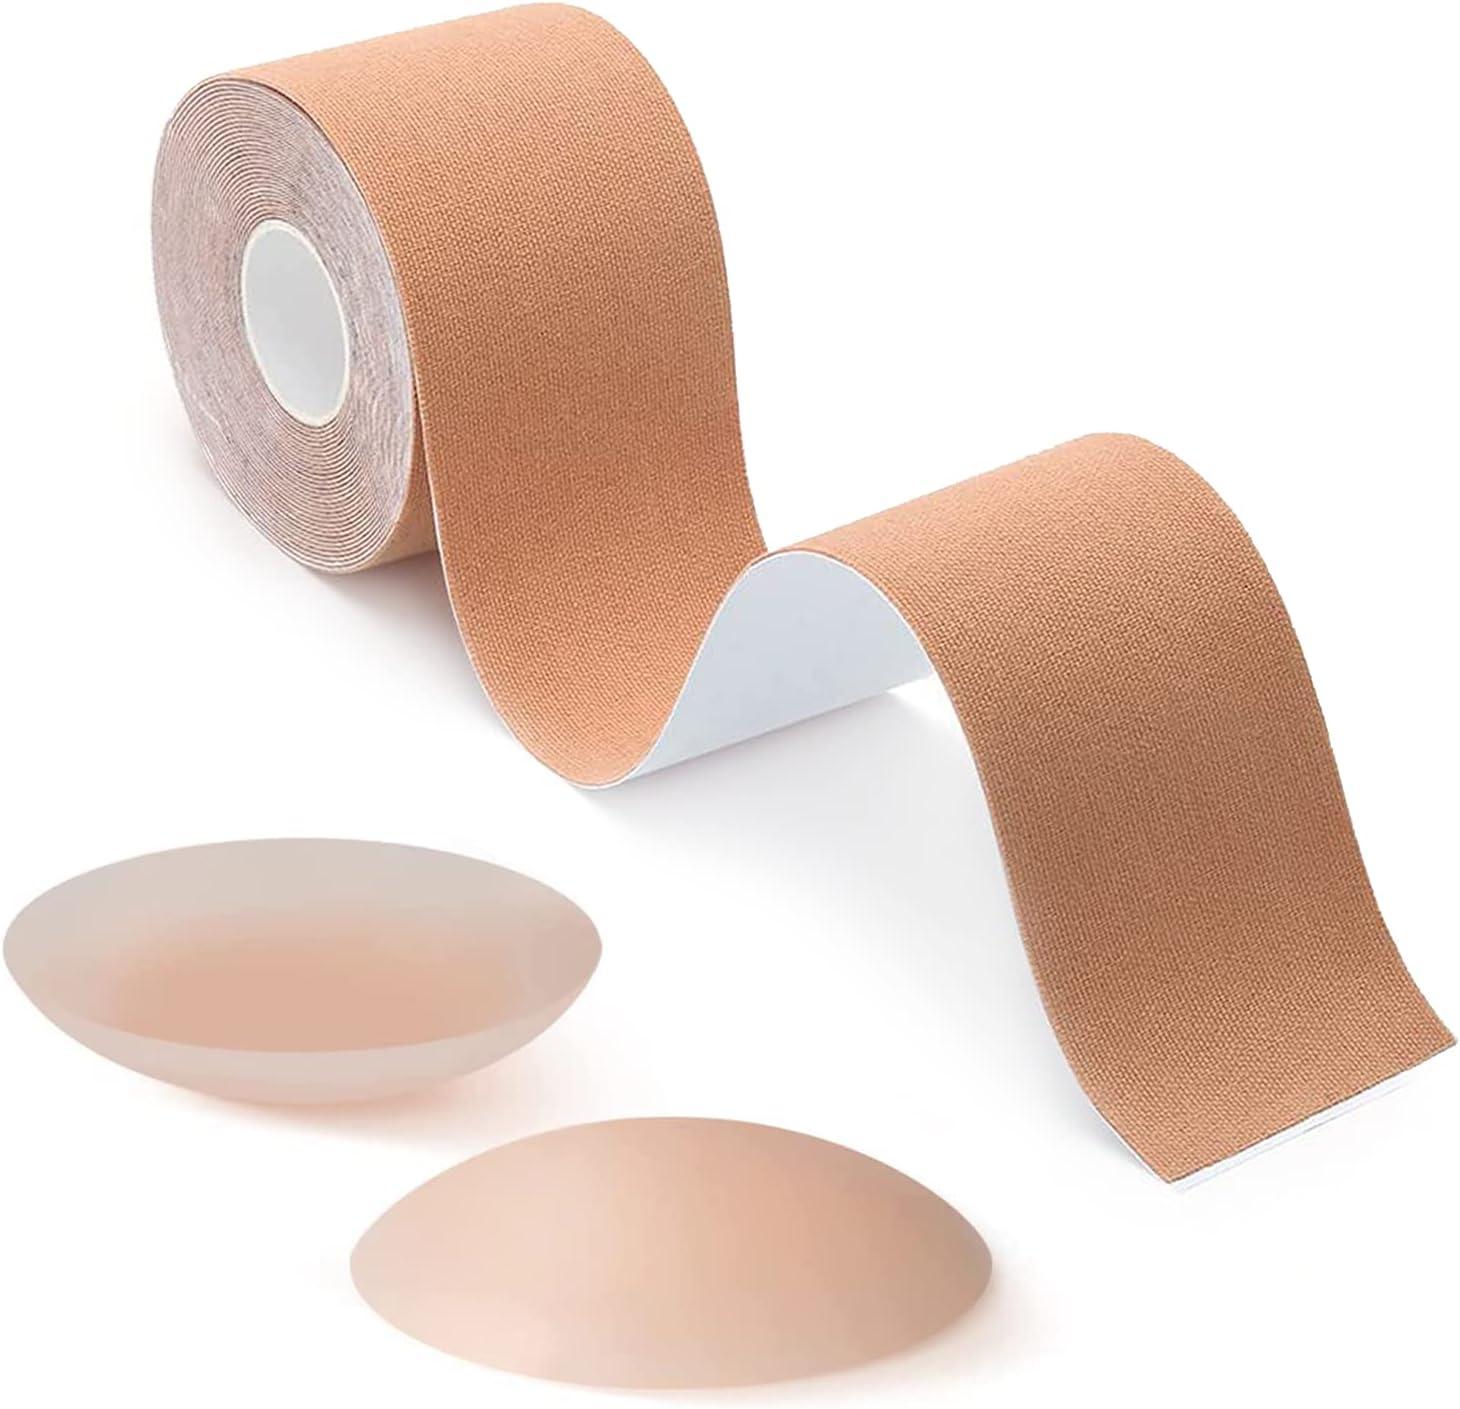 Xl Breast Lift Tape For Large Breasts, Breathable Chest Support Tape